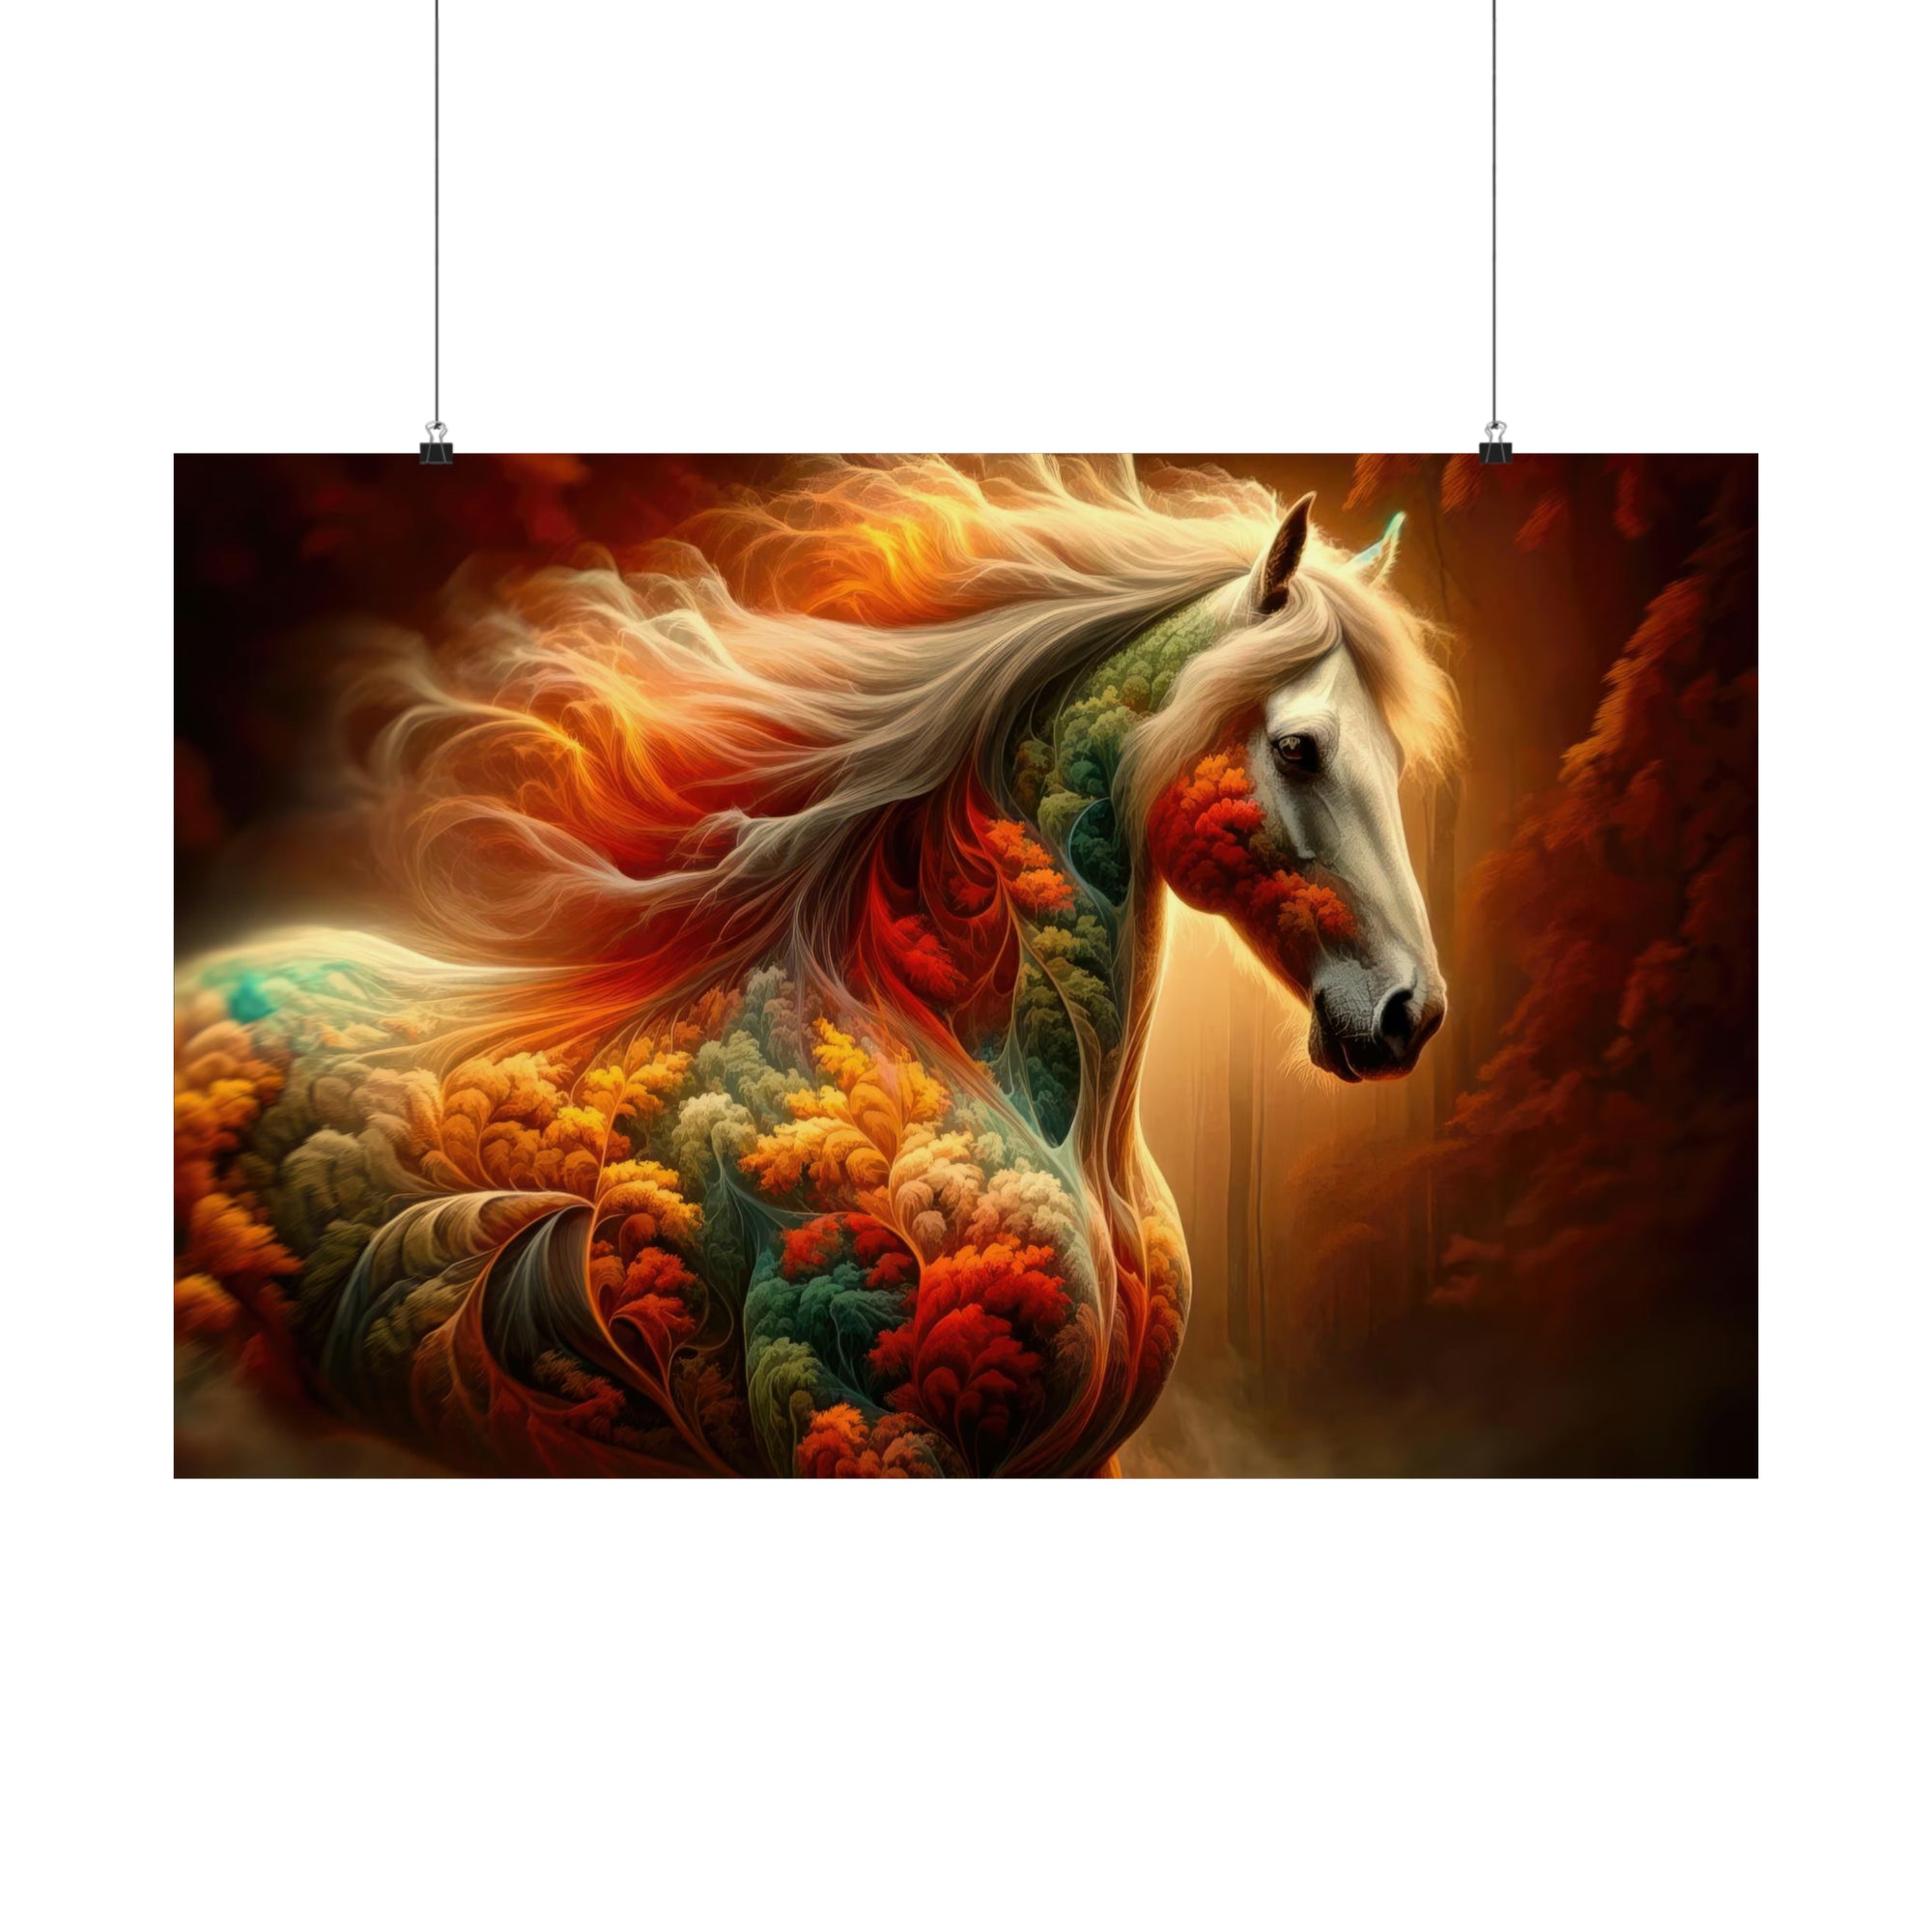 The Equine Illusion Poster